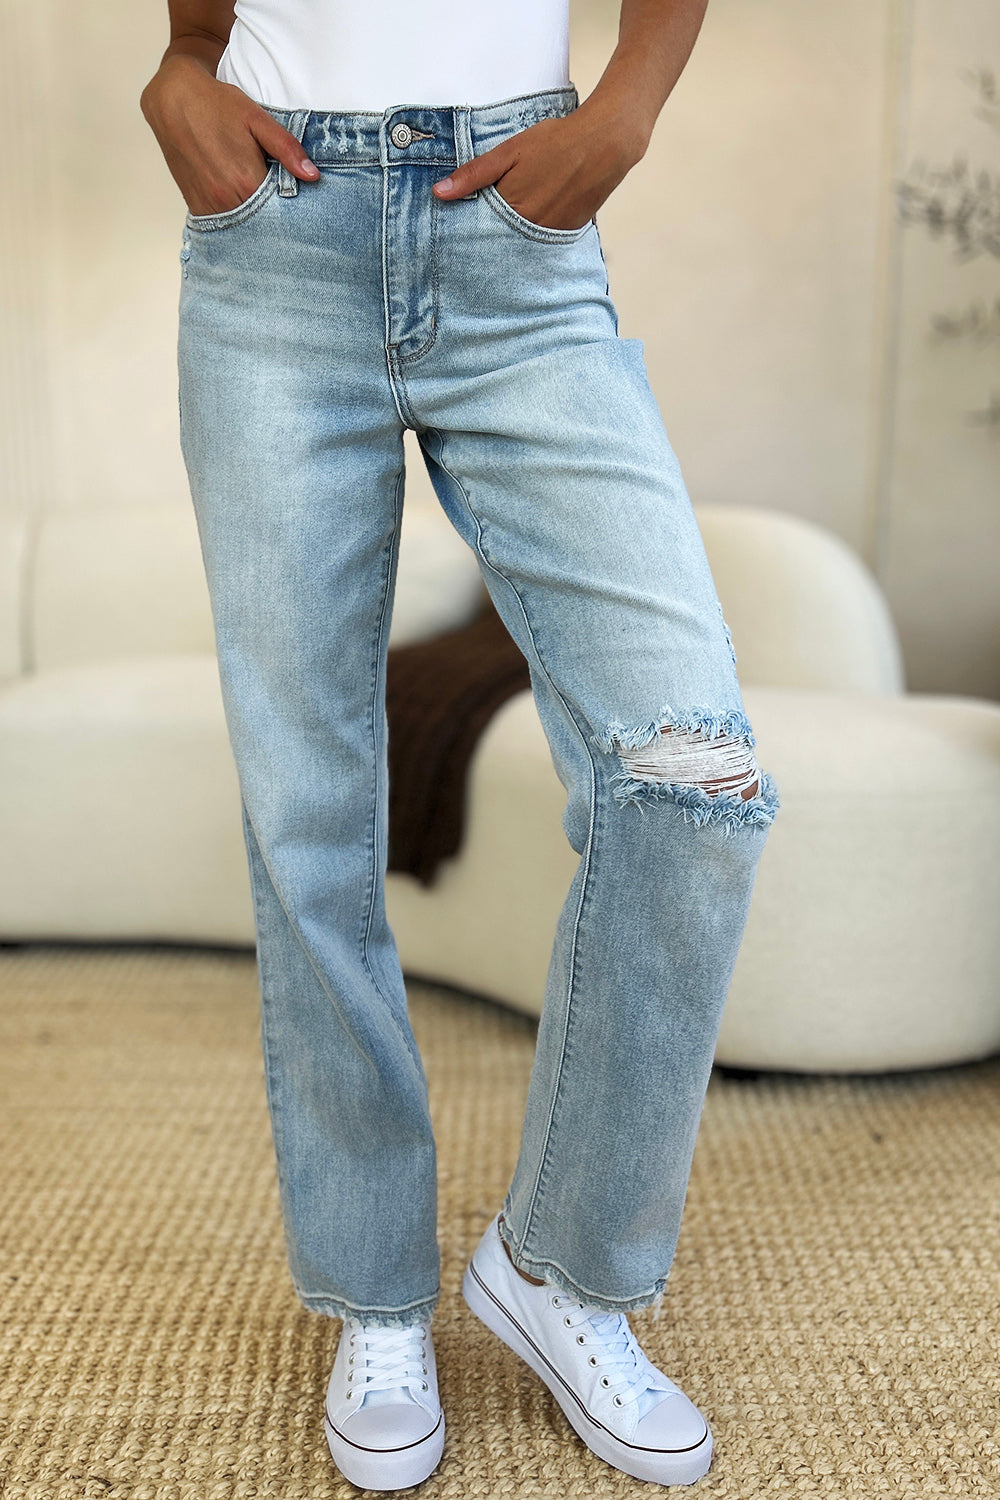 Judy Blue Full Size High Waist Distressed Straight Jeans